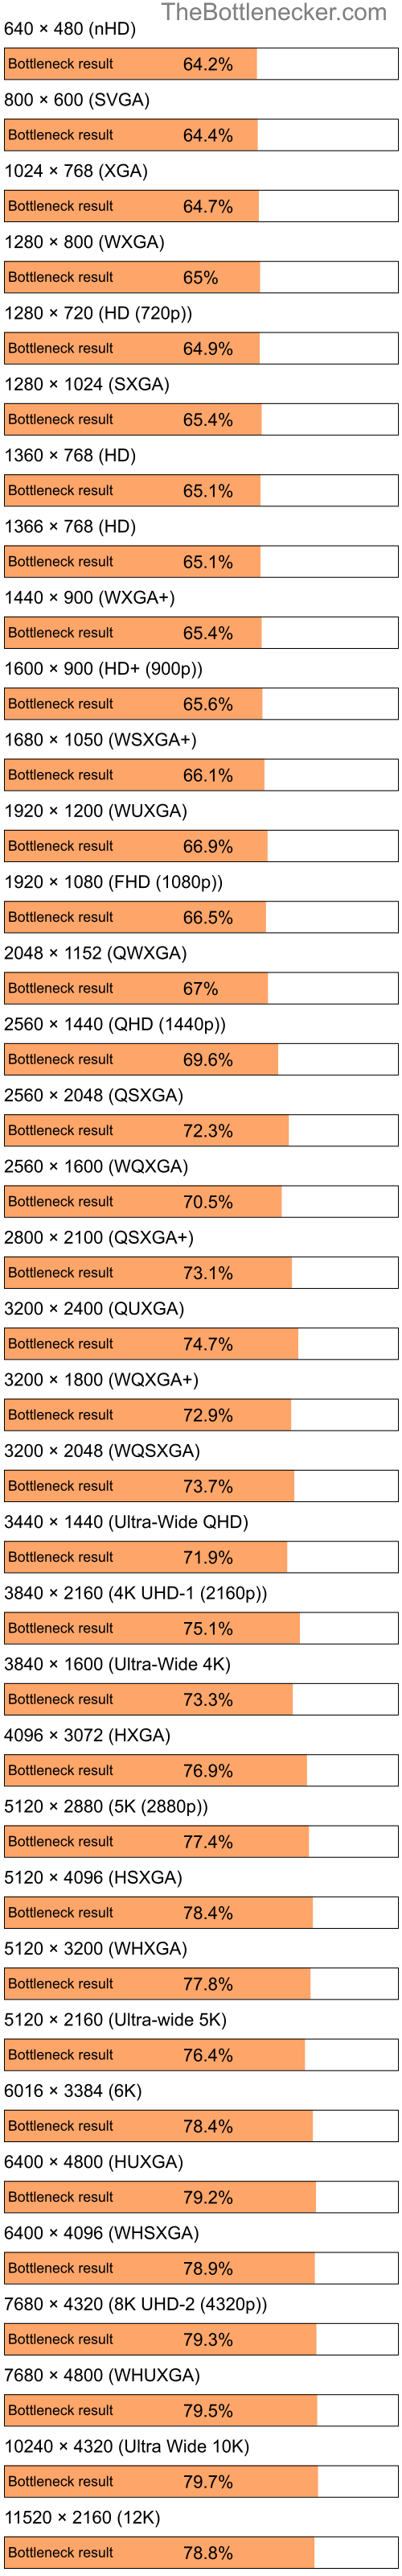 Bottleneck results by resolution for Intel Celeron and NVIDIA Quadro FX 360M in General Tasks